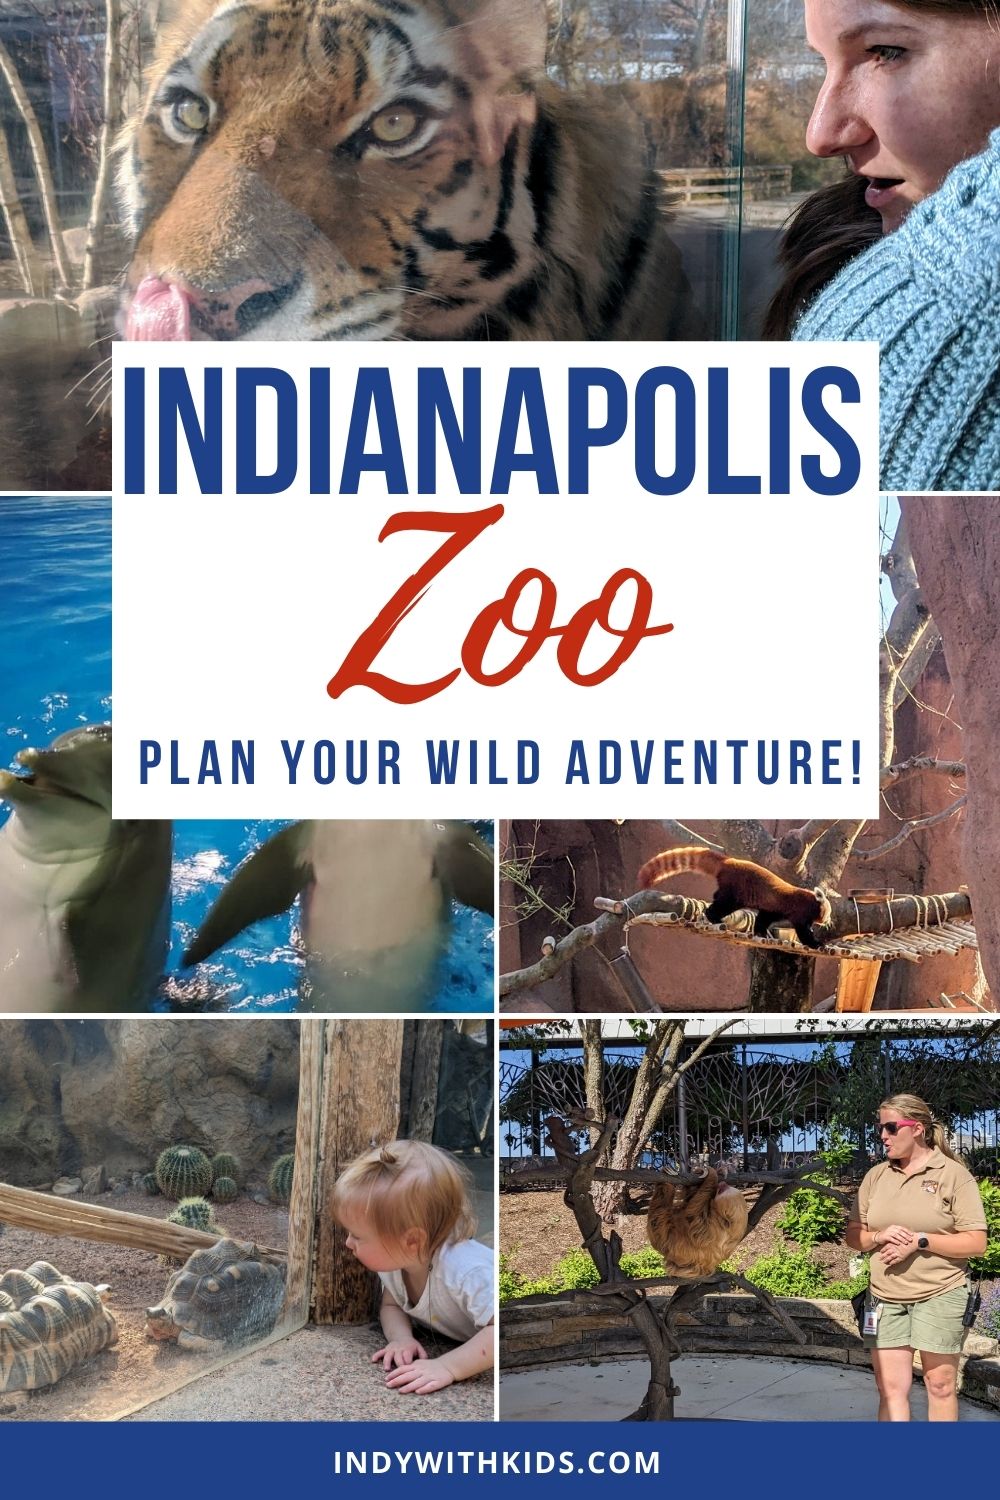 The Indy with Kids guide to visiting the Indianapolis Zoo.